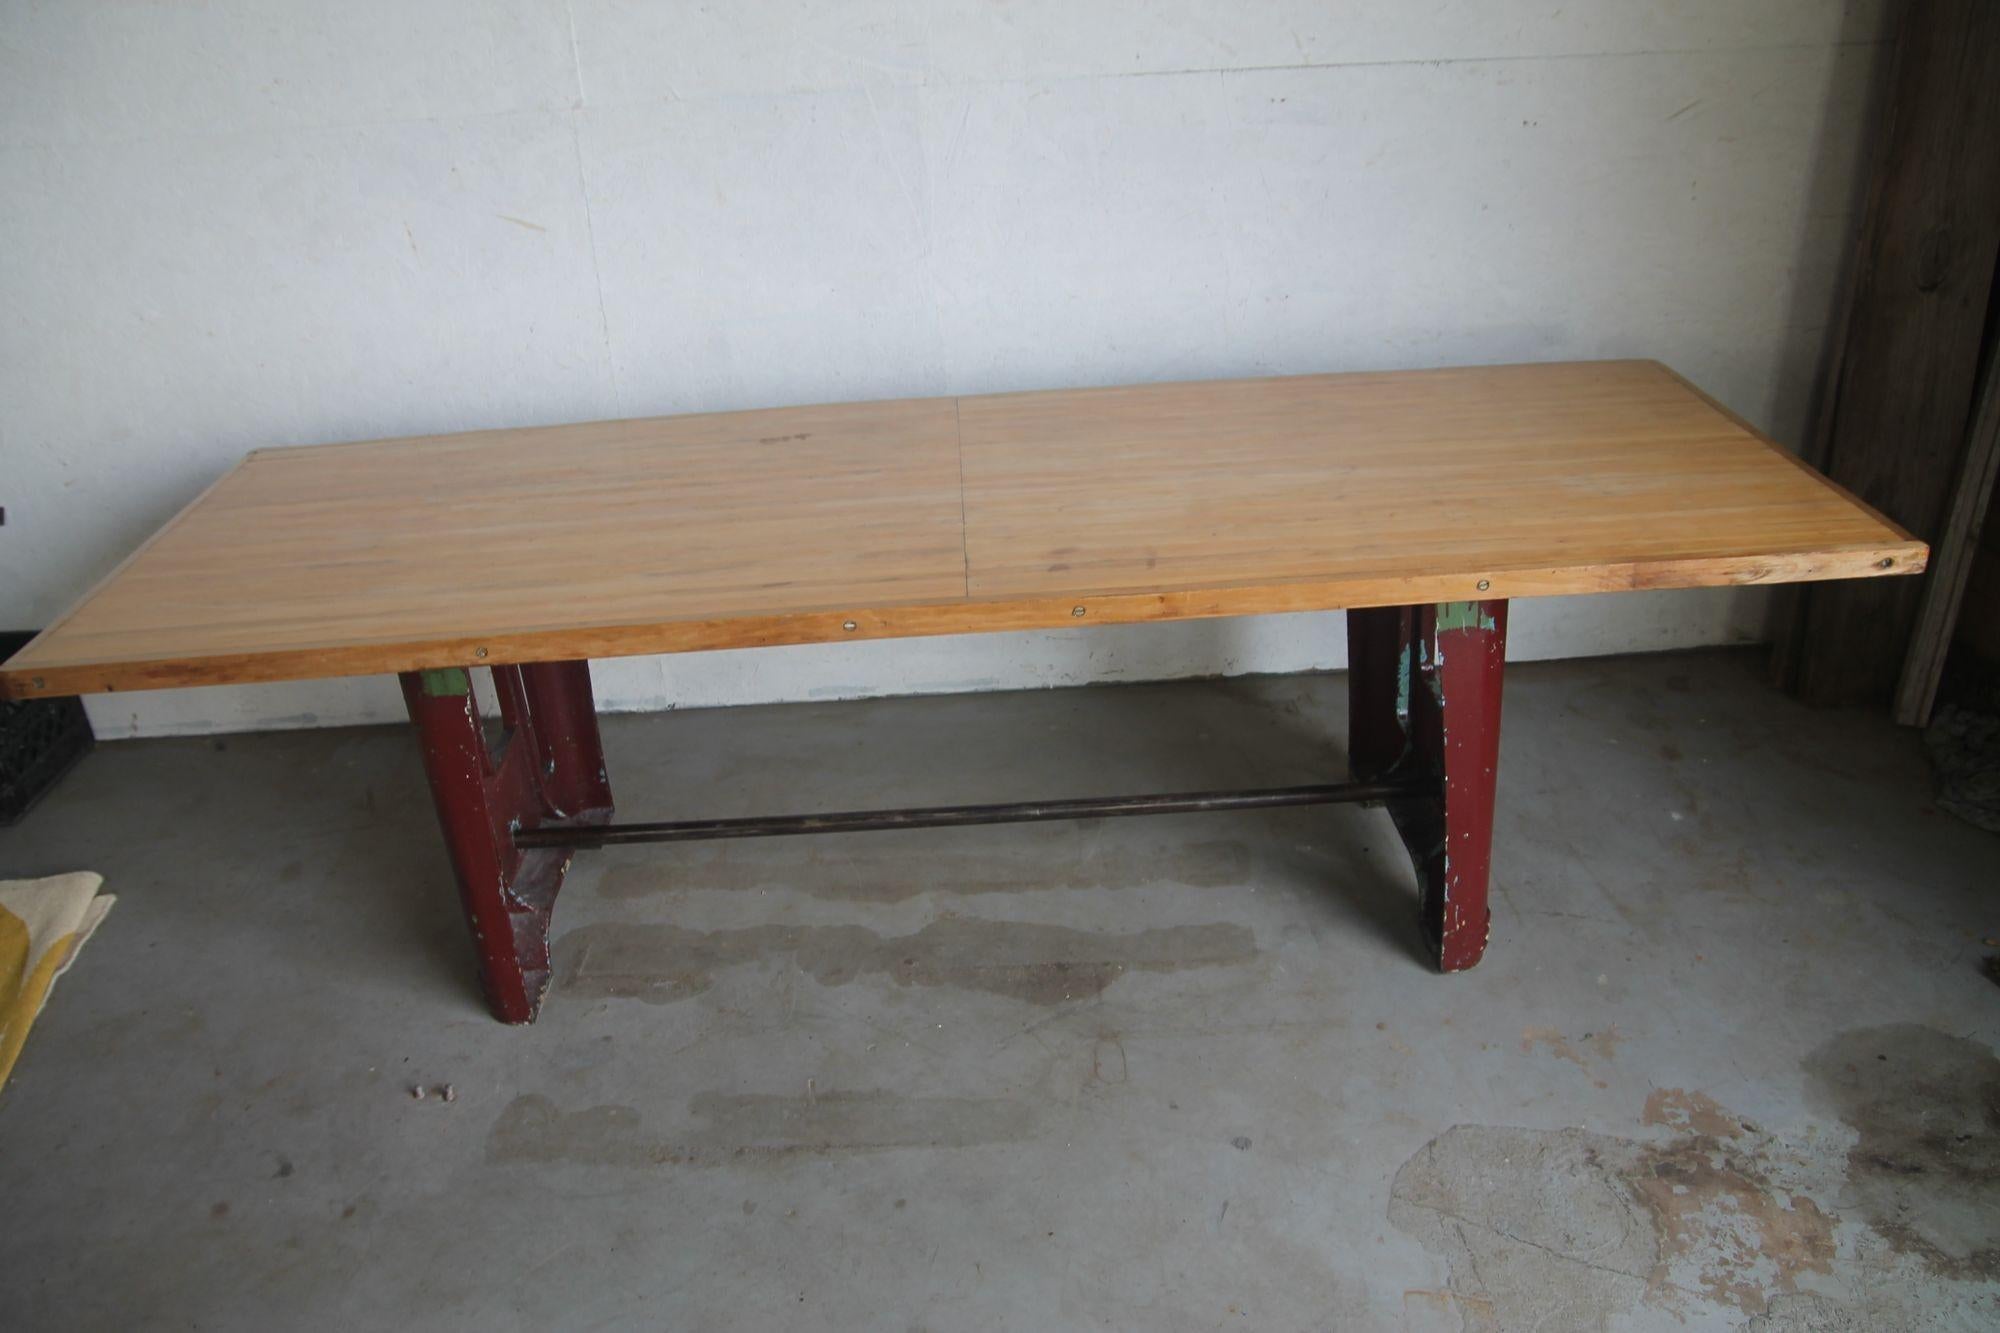 Pleased to offer this great industrial dining table that was recently removed from a NYC loft. Table has a fantasic deco era base that has multi layers of paint over the years. Red now is the prodominate color but you do see signs of yellow and